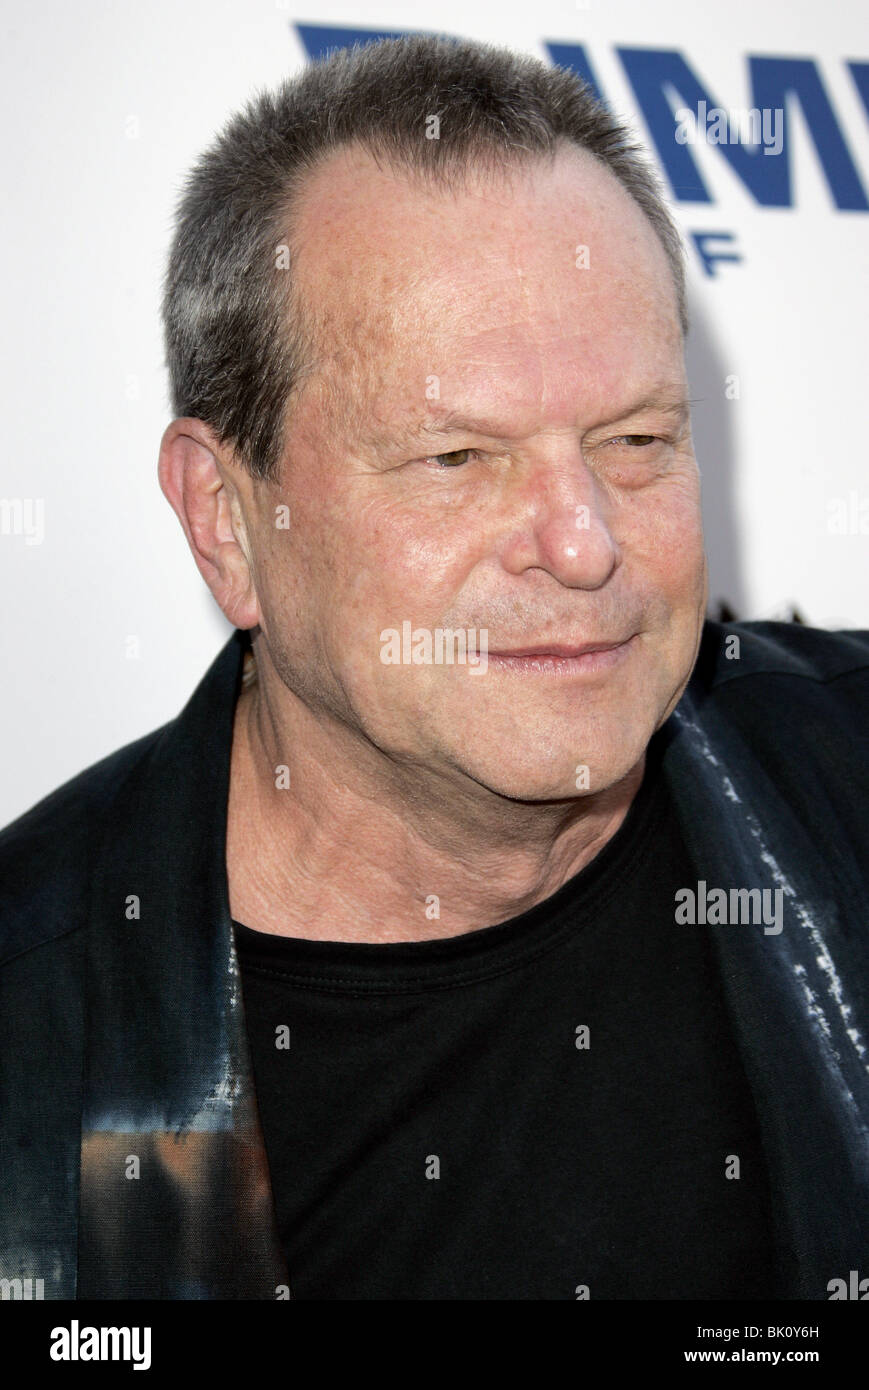 TERRY GILLIAM THE BROTHERS GRIMM FILM PREMI DIRECTORS GUILD OF AMERICA HOLLWOOD LA USA 08 August 2005 Stock Photo